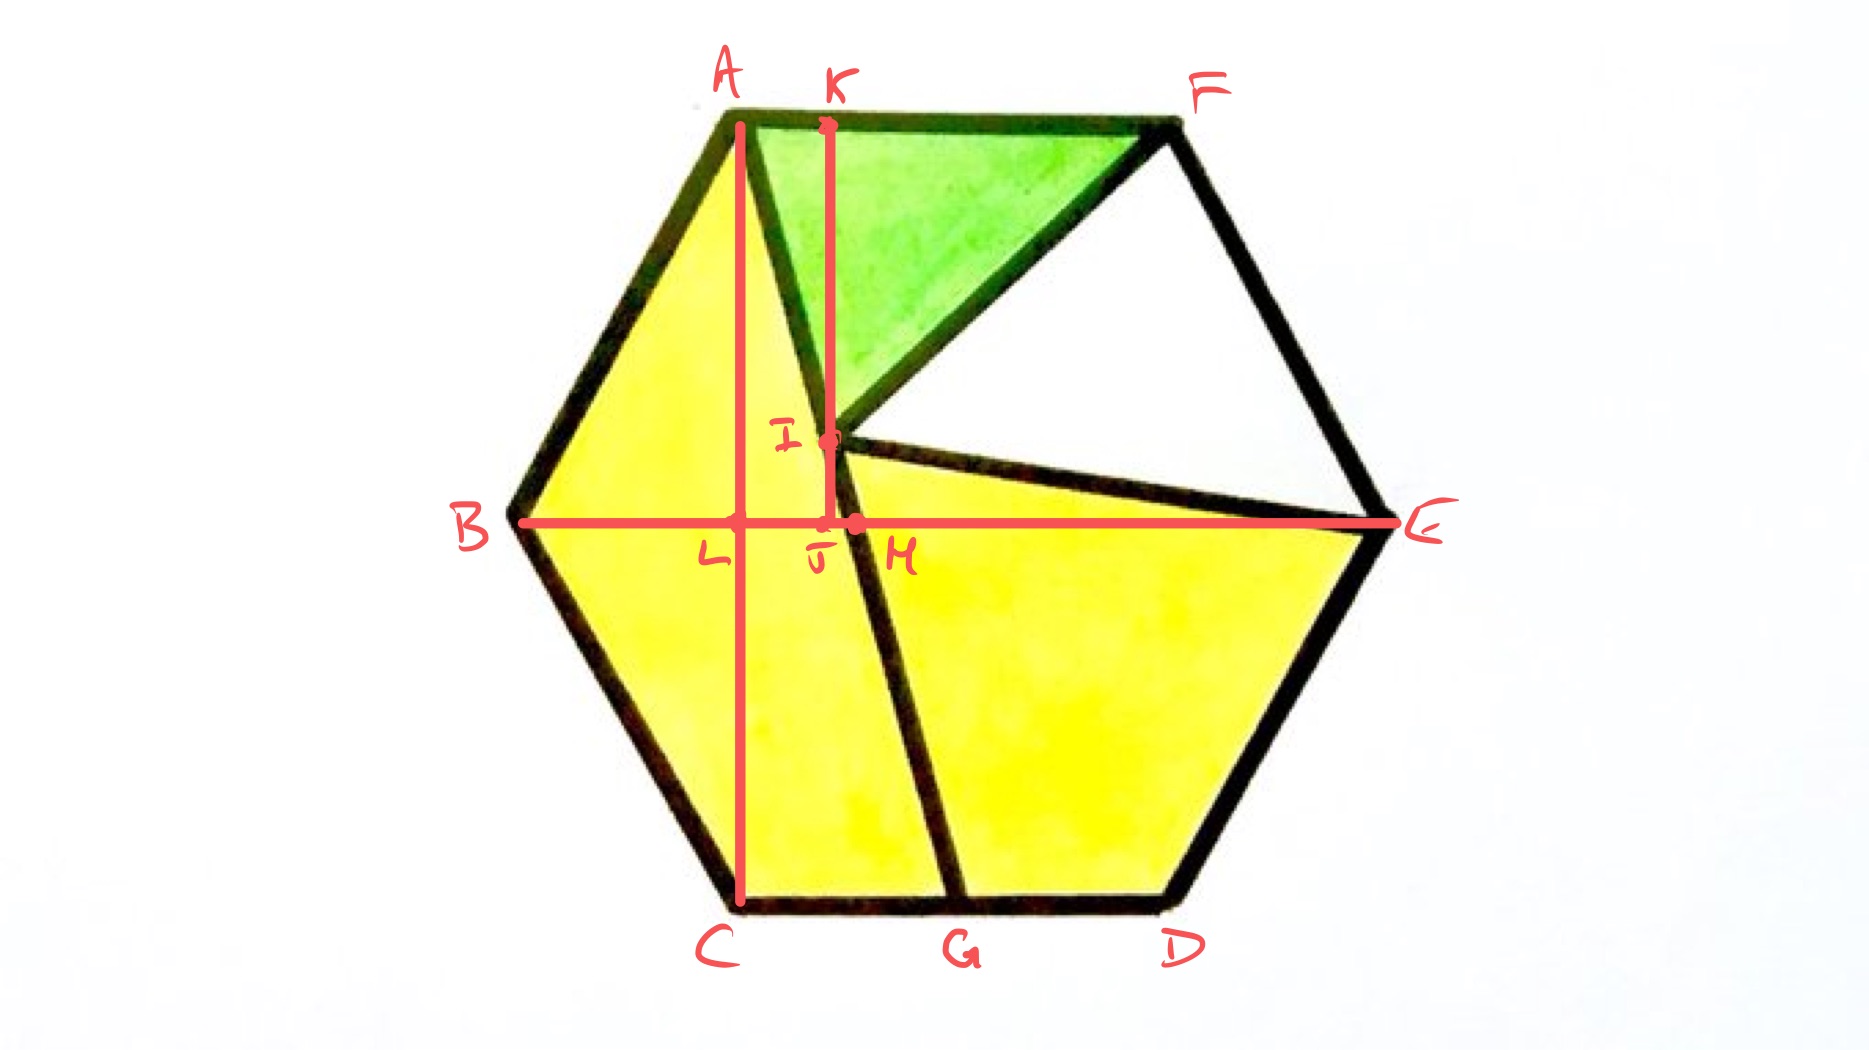 Divided hexagon labelled